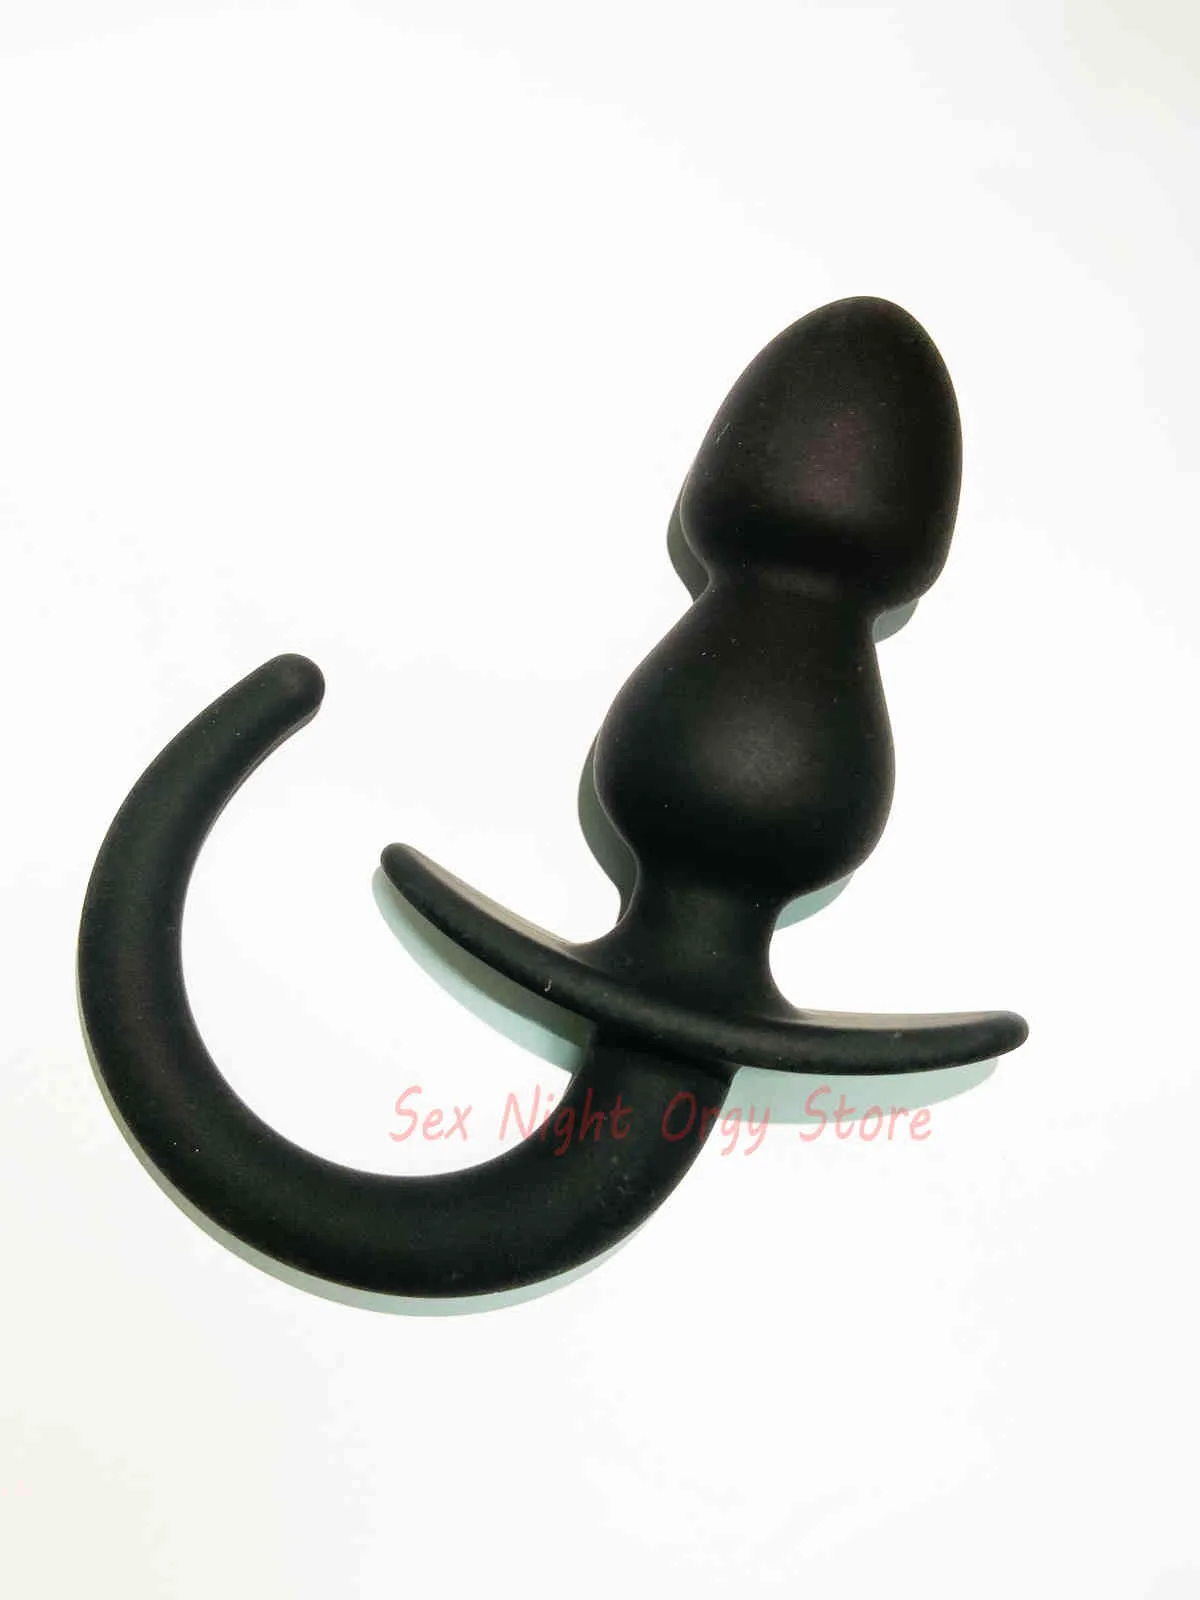 Puppy Play Silicone Dog Tail Plug Erotic Anal sexy Toys for Women Men Slave Game Role Pup Bdsm G-spot Massage Butt